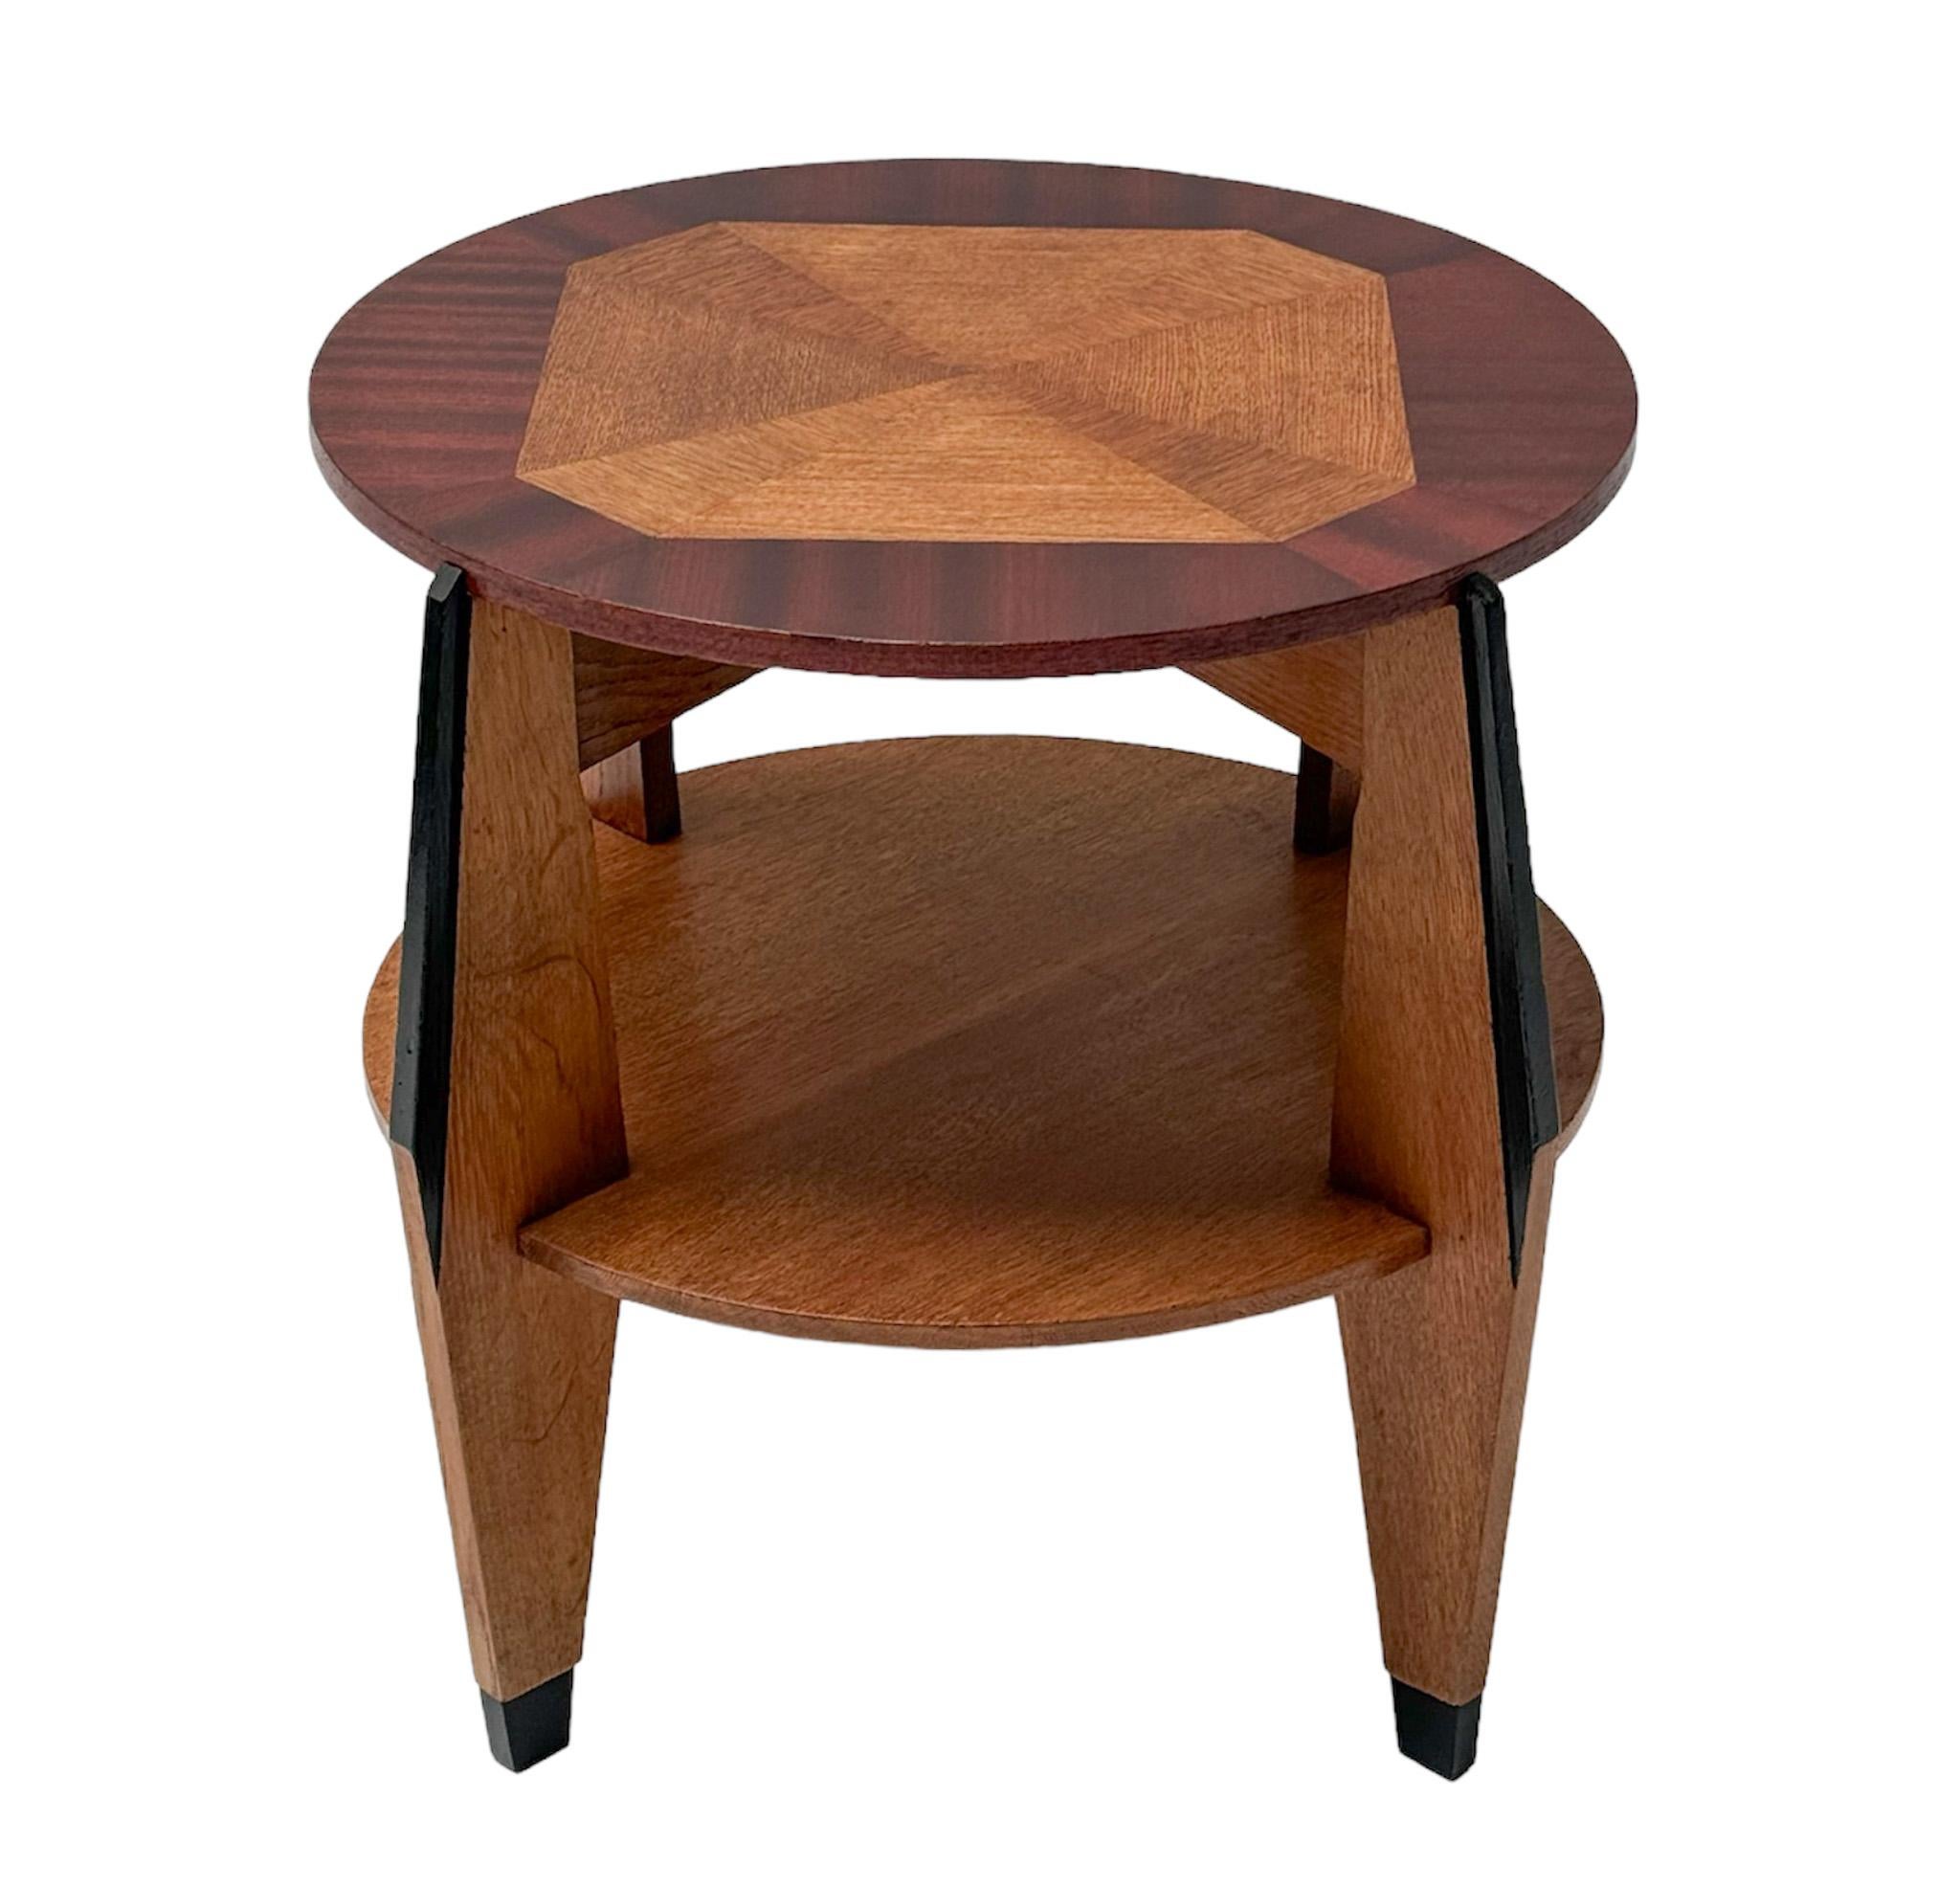 Stunning and rare Art Deco Modernist side table.
Design by P.E.L. Izeren for De Genneper Molen.
Striking Dutch design from the 1920s.
Solid oak with original oak and walnut veneered top.
Original black lacquered elements.
In very good original